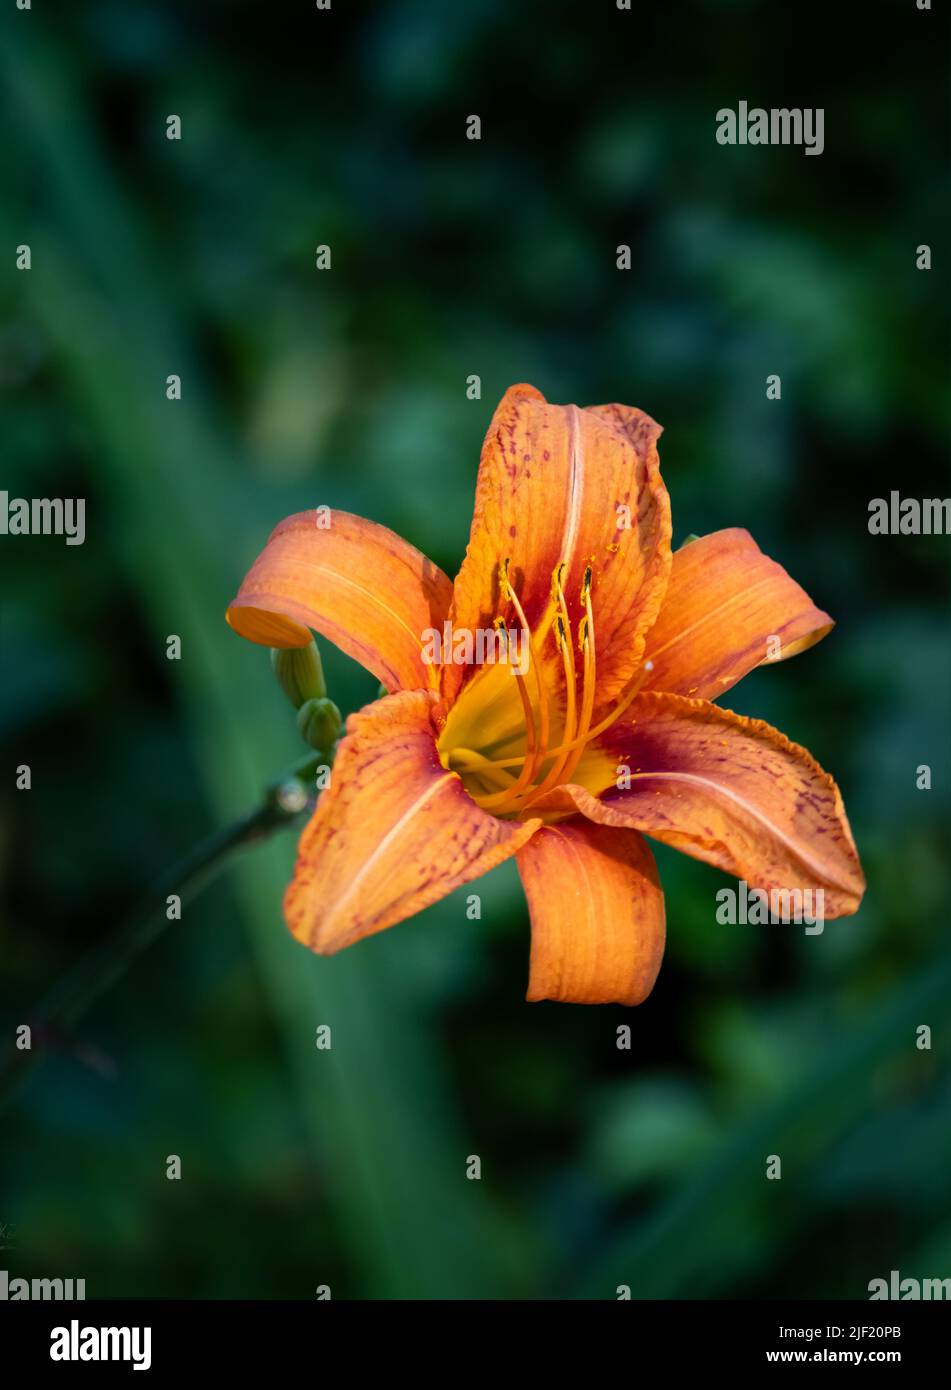 Orange Day Lily,Lilium lancifolium, viewed from above on a green leafy background in spring or summer, Lancaster, Pennsylvania Stock Photo